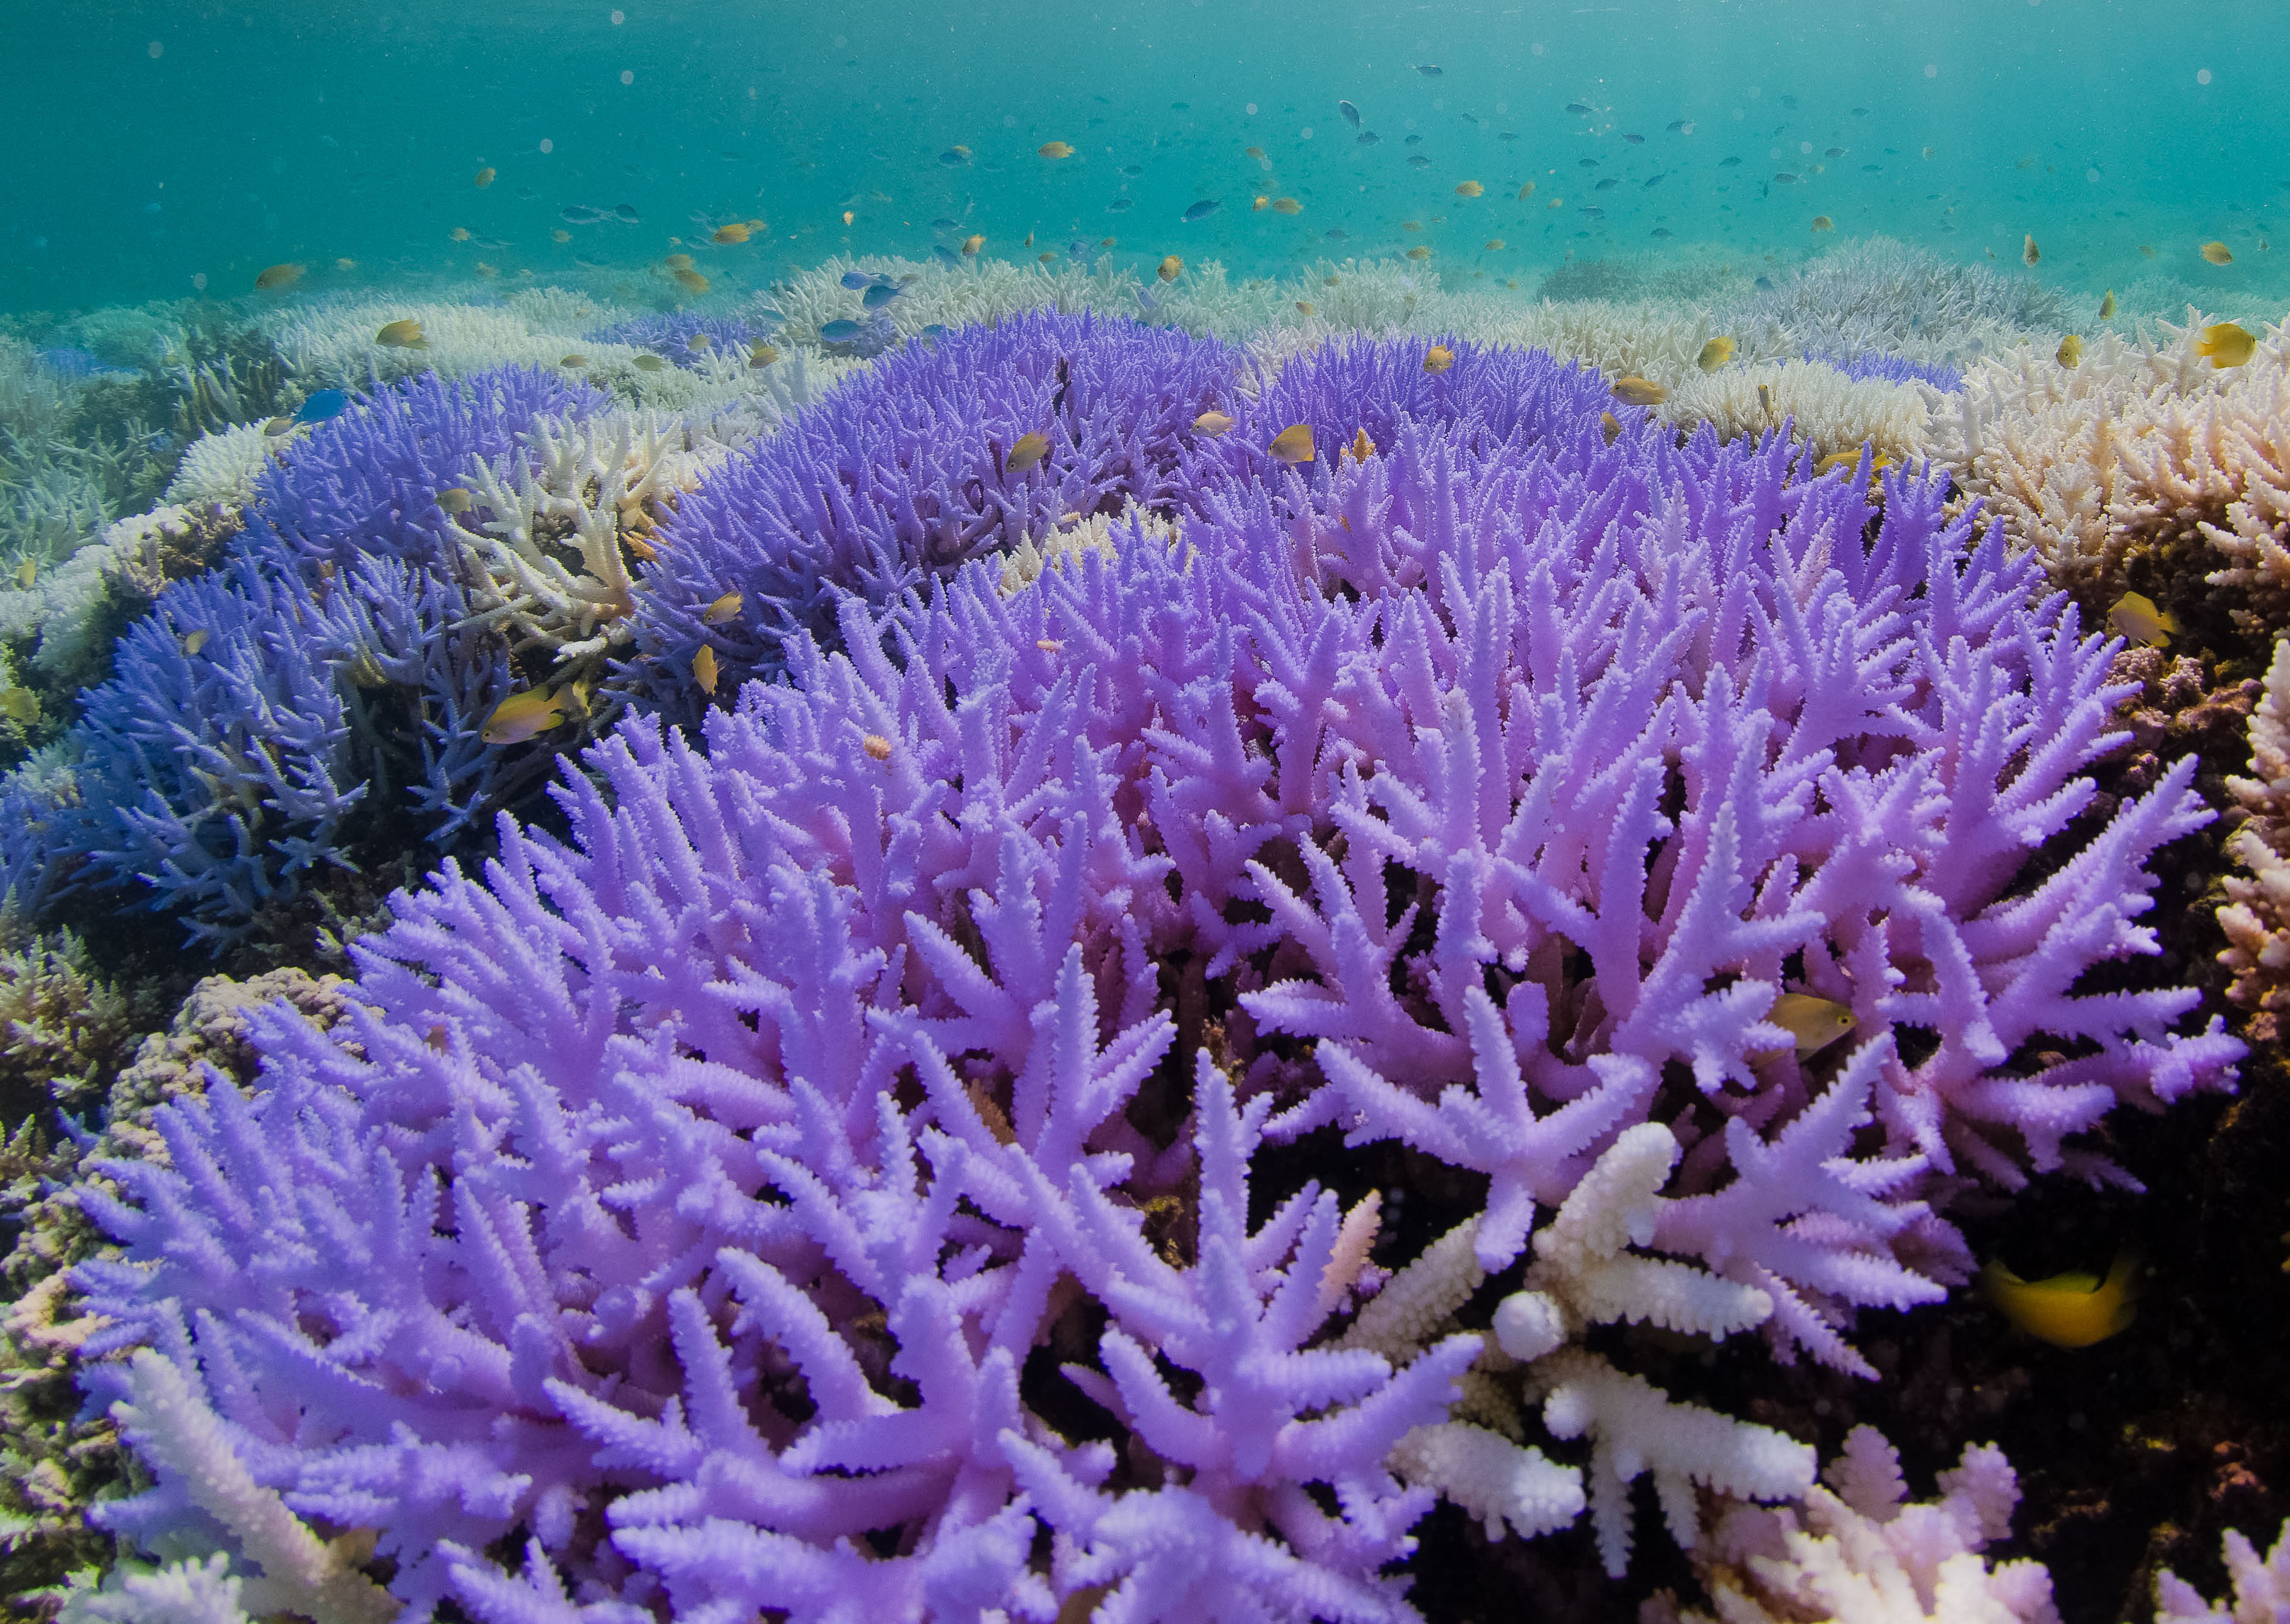 Neon purple bleached coral, New Caledonia, 2016. (Richard Vevers/The Ocean Agency)